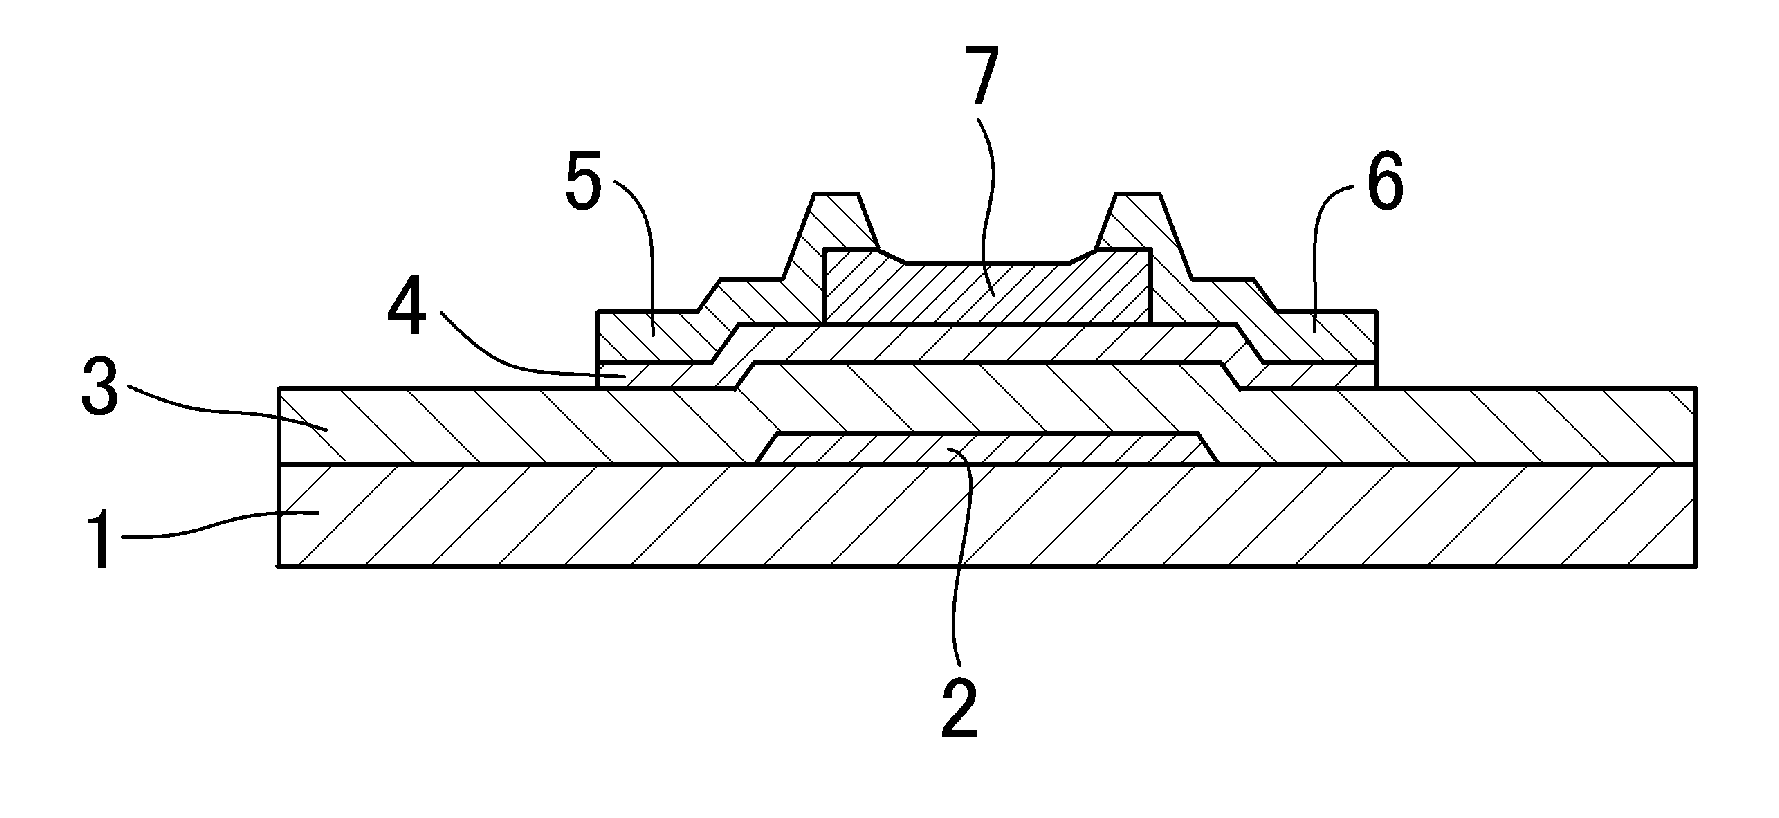 Sputtering target for oxide thin film and process for producing the sputtering target